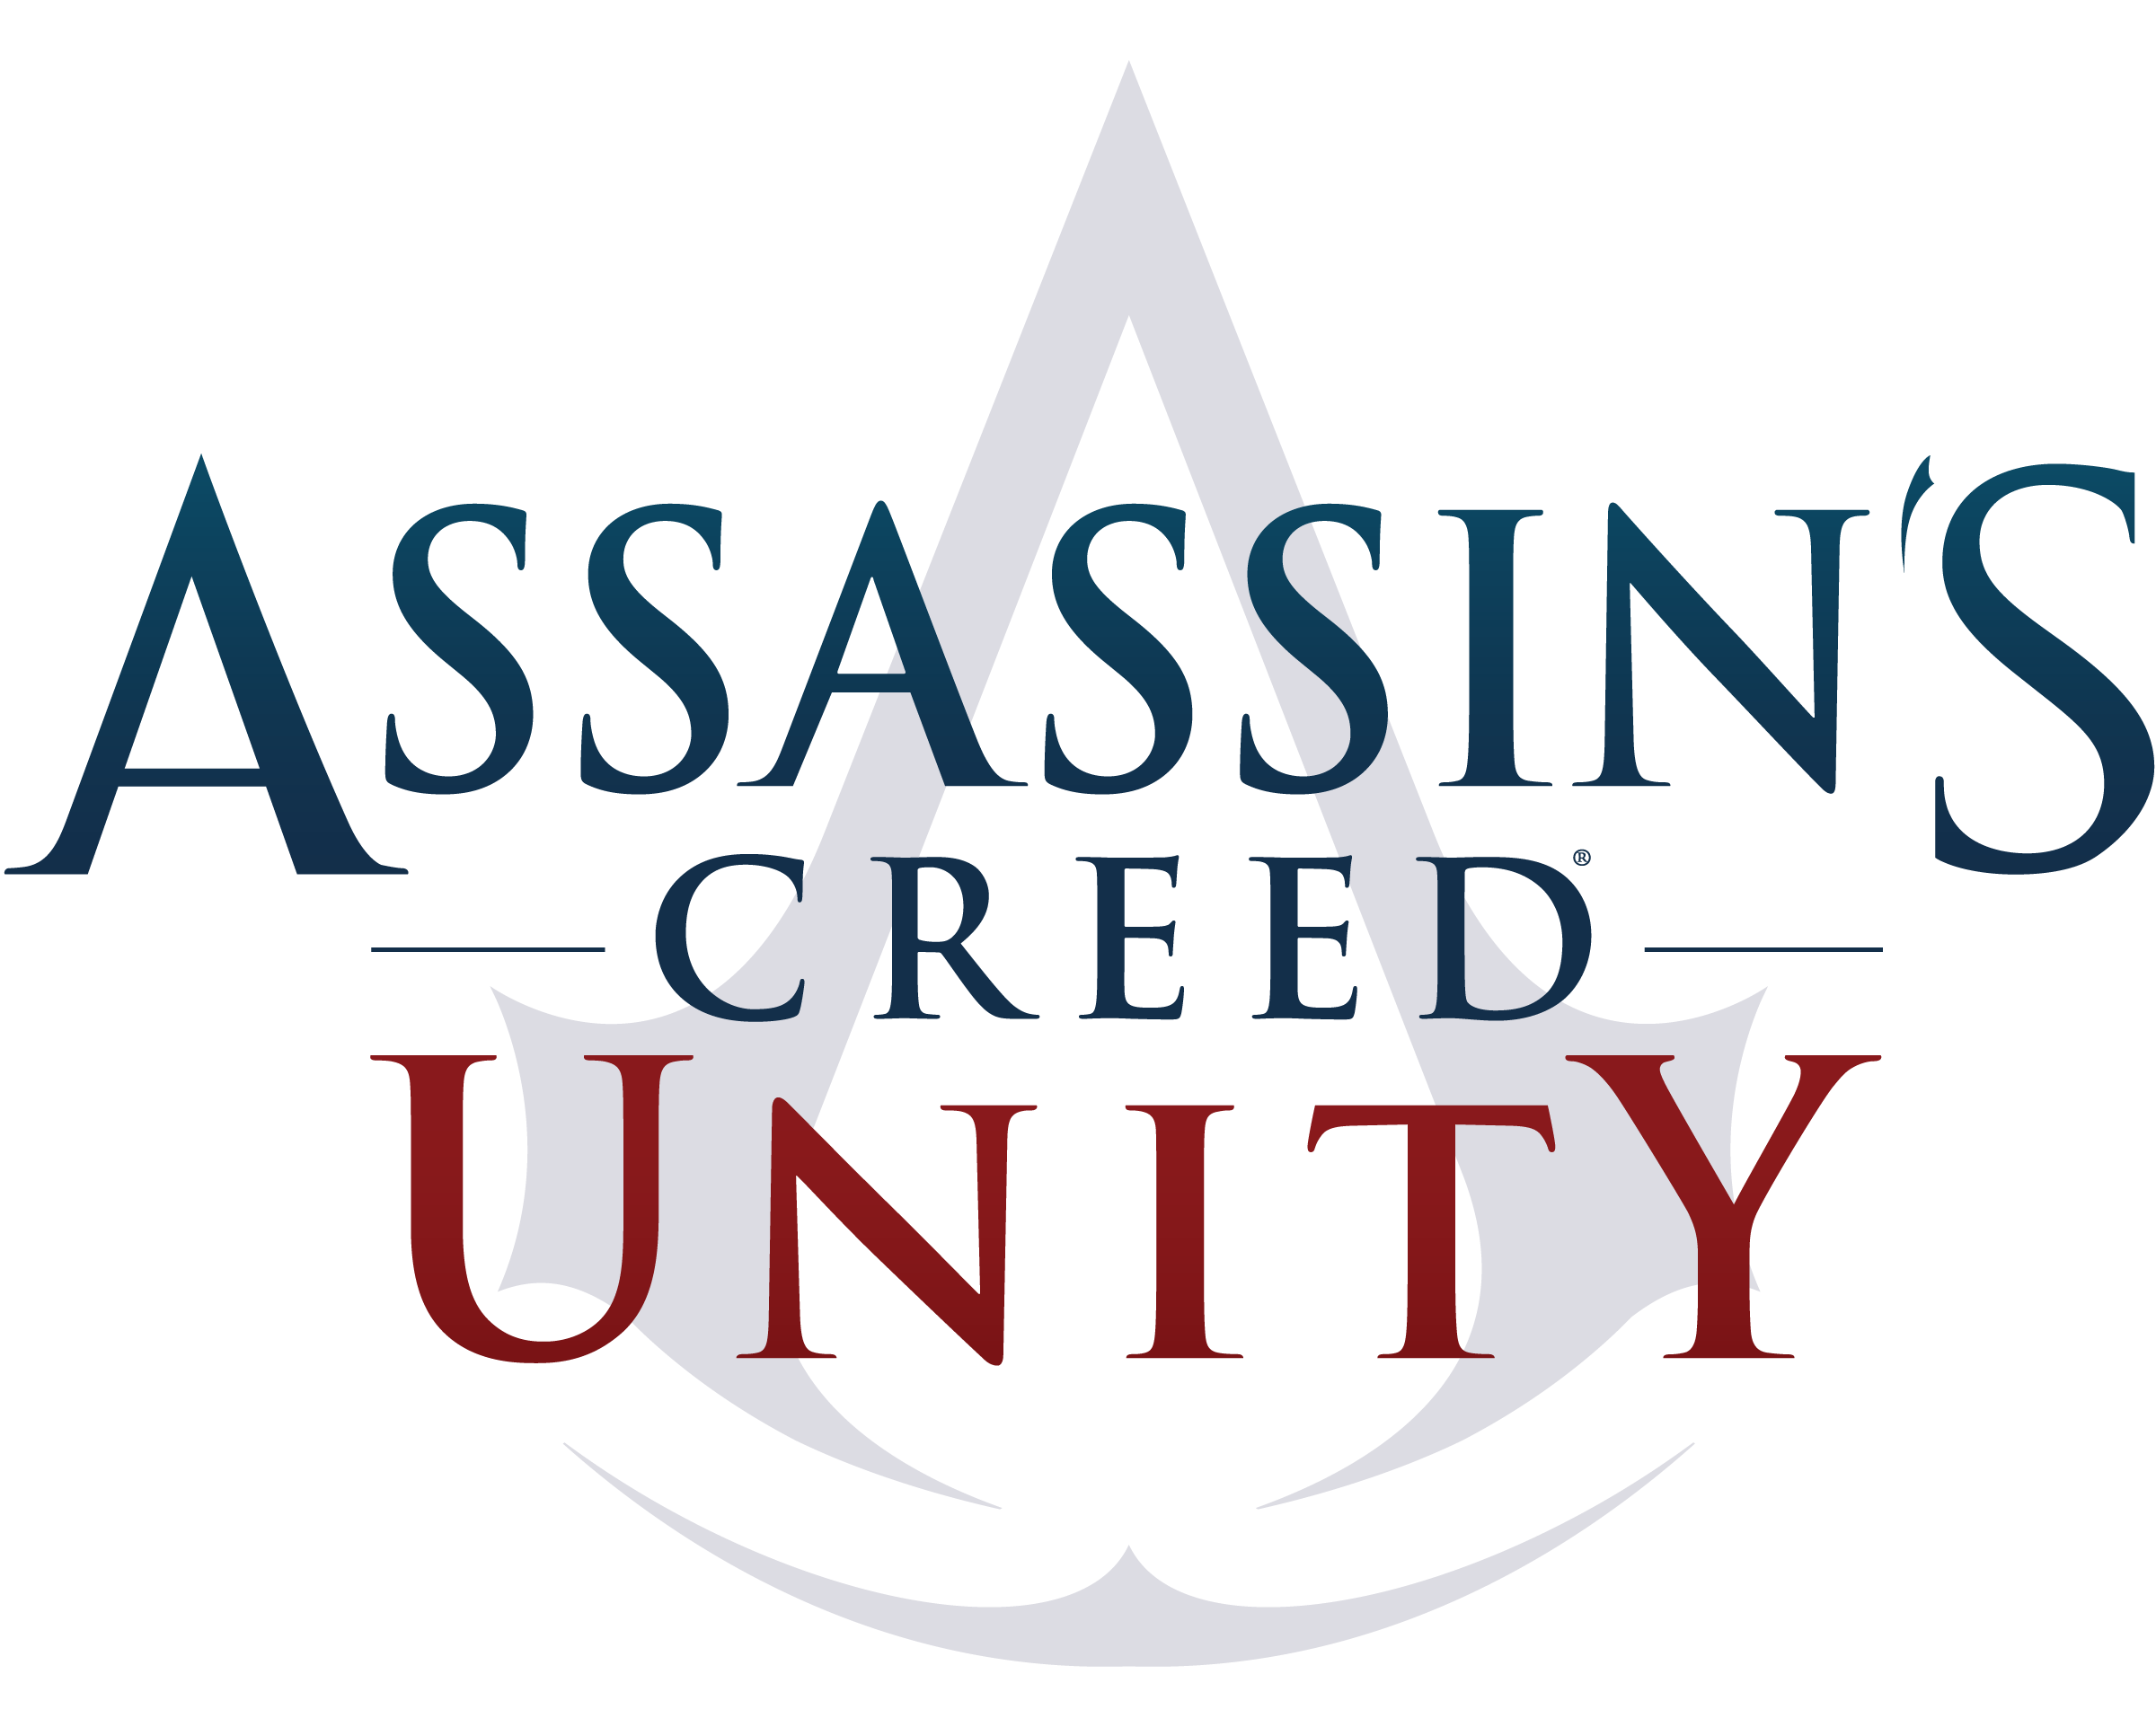 New Assassin Creed: Unity Missions With Season Pass